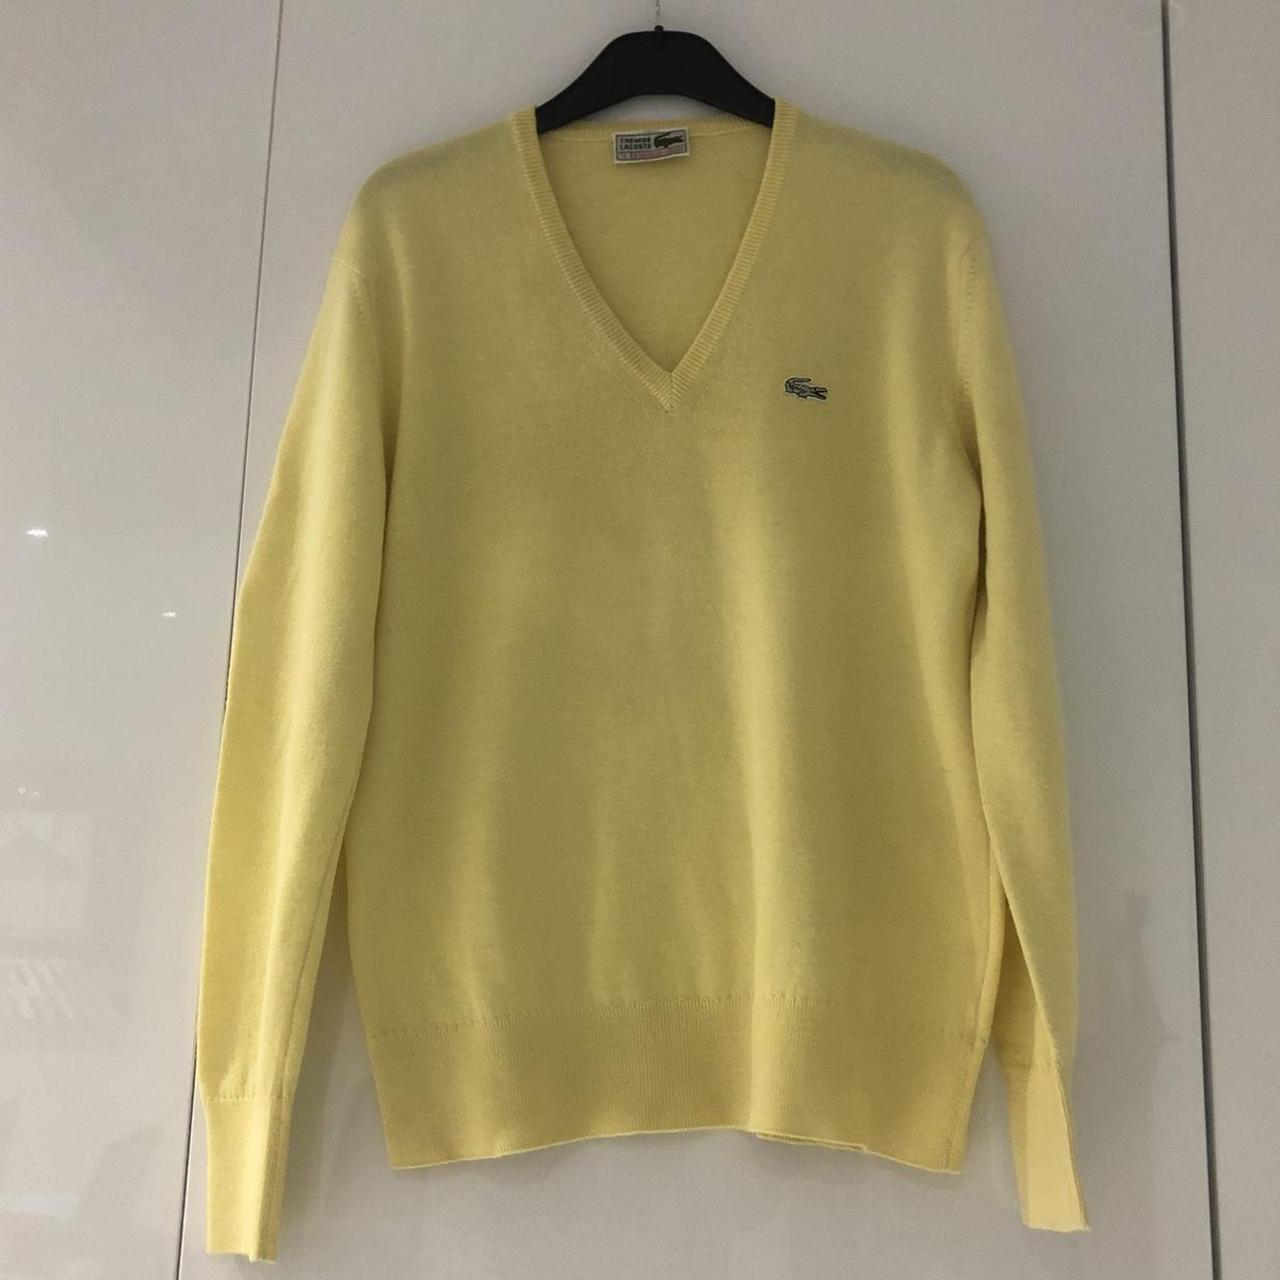 Lacoste vintage V neck yellow jumper / sweater with... - Depop